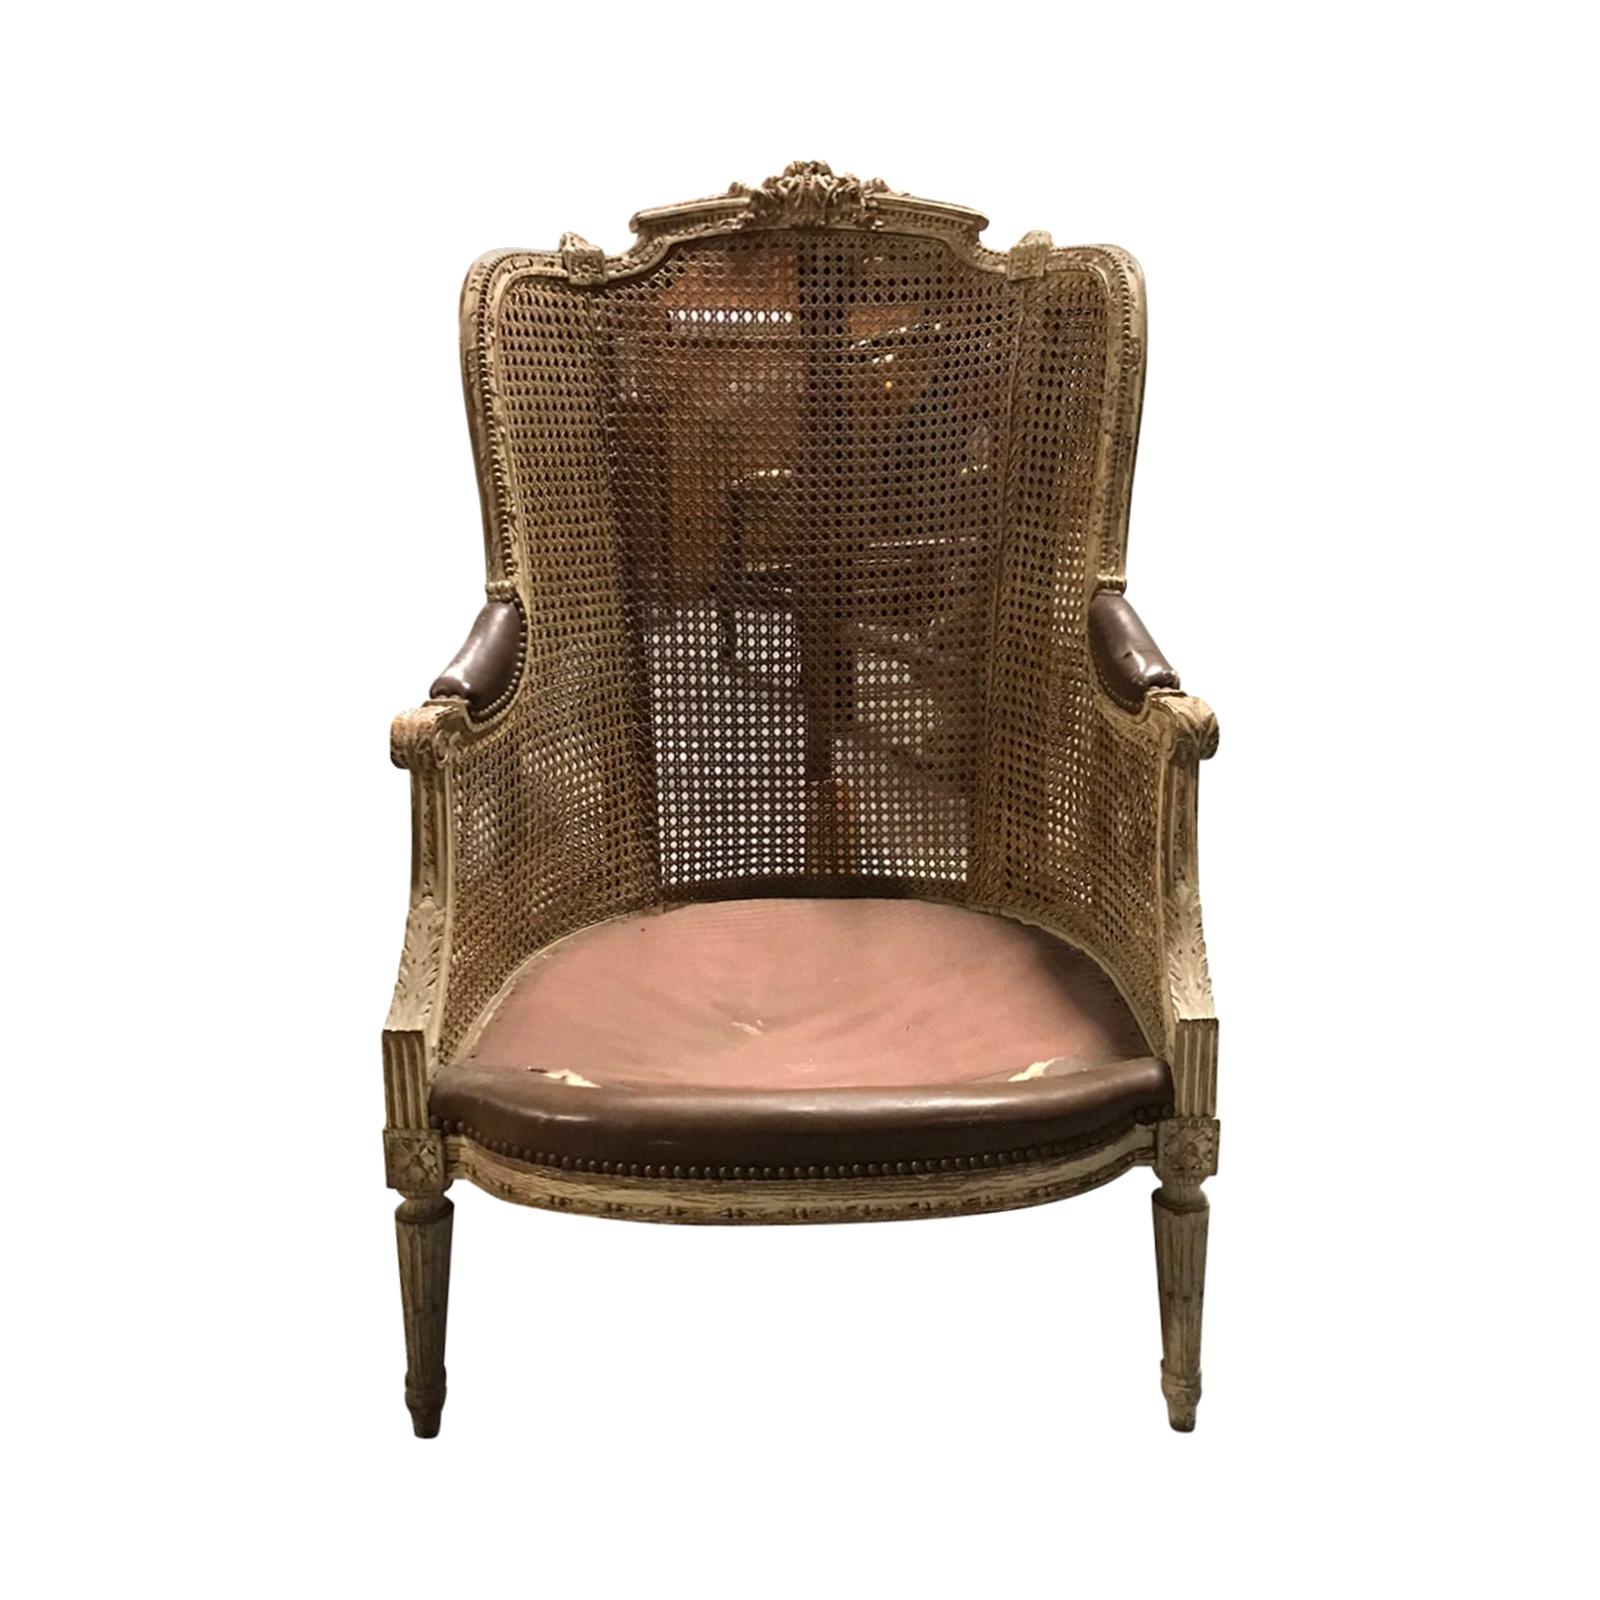 19th-20th Century French Caned Armchair